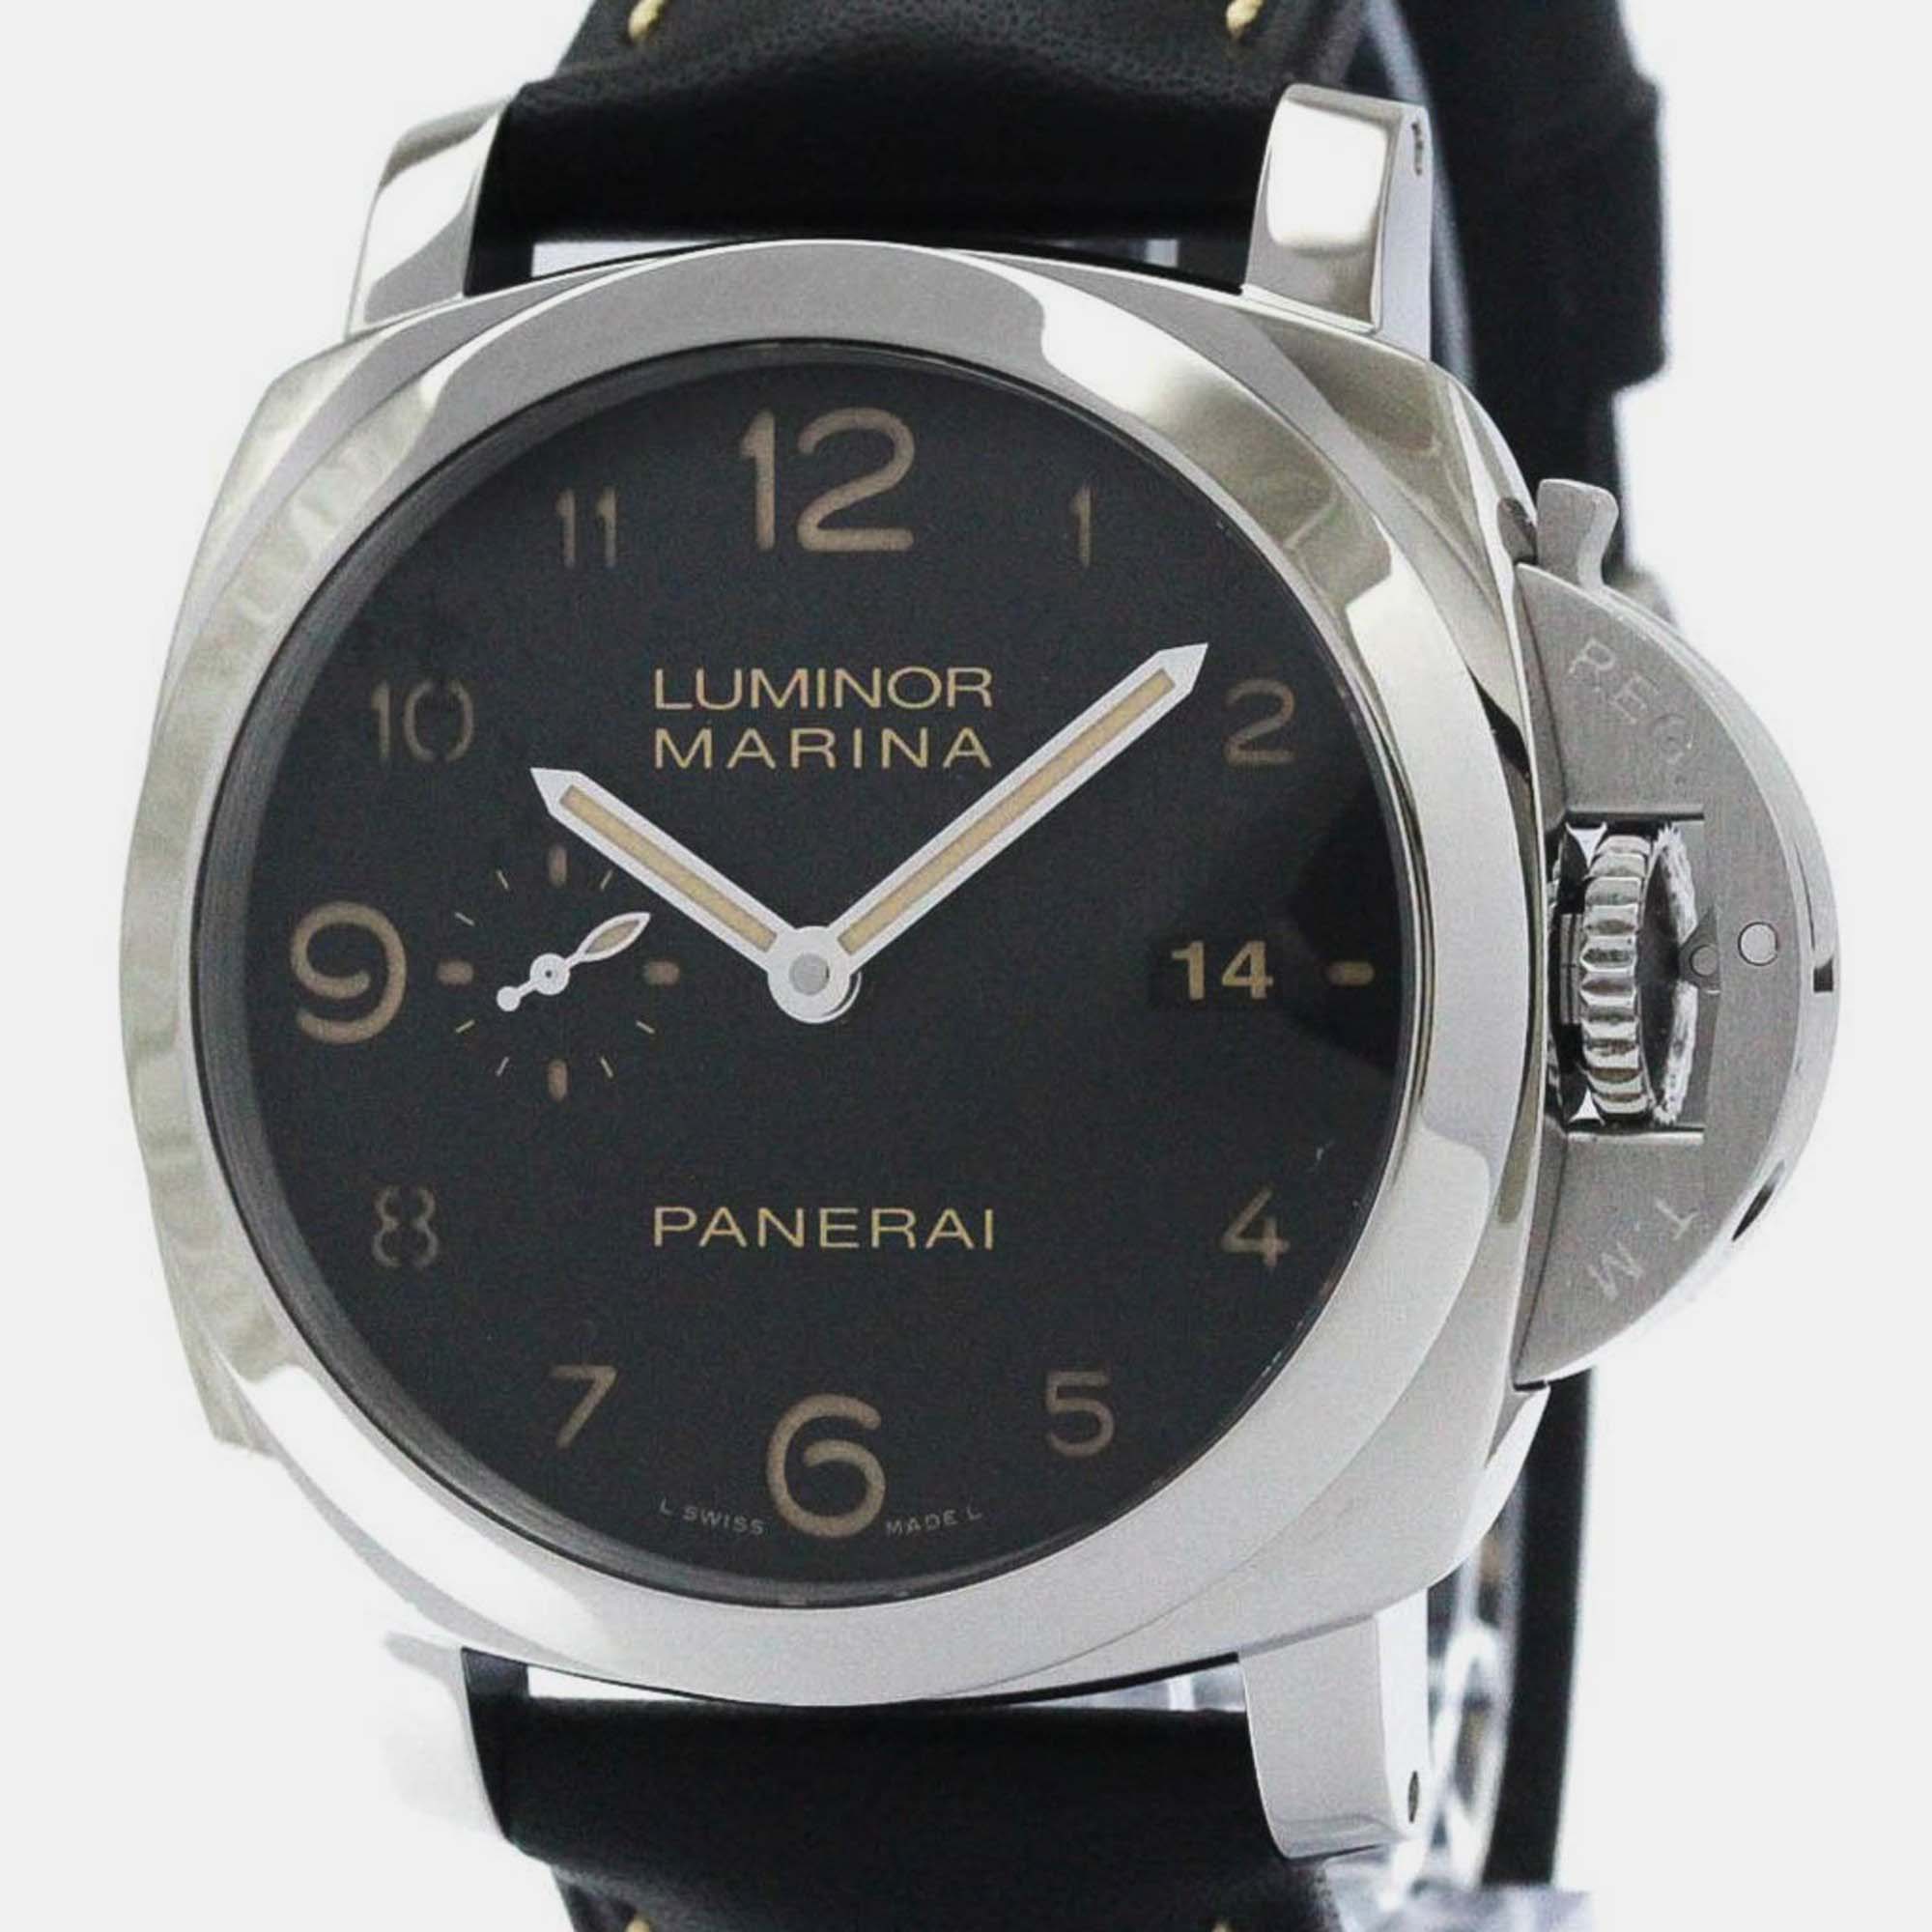 A classy silhouette made of high quality materials and packed with precision and luxury makes this authentic Panerai wristwatch the perfect choice for a sophisticated finish to any look. It is a grand creation to elevate the everyday experience.